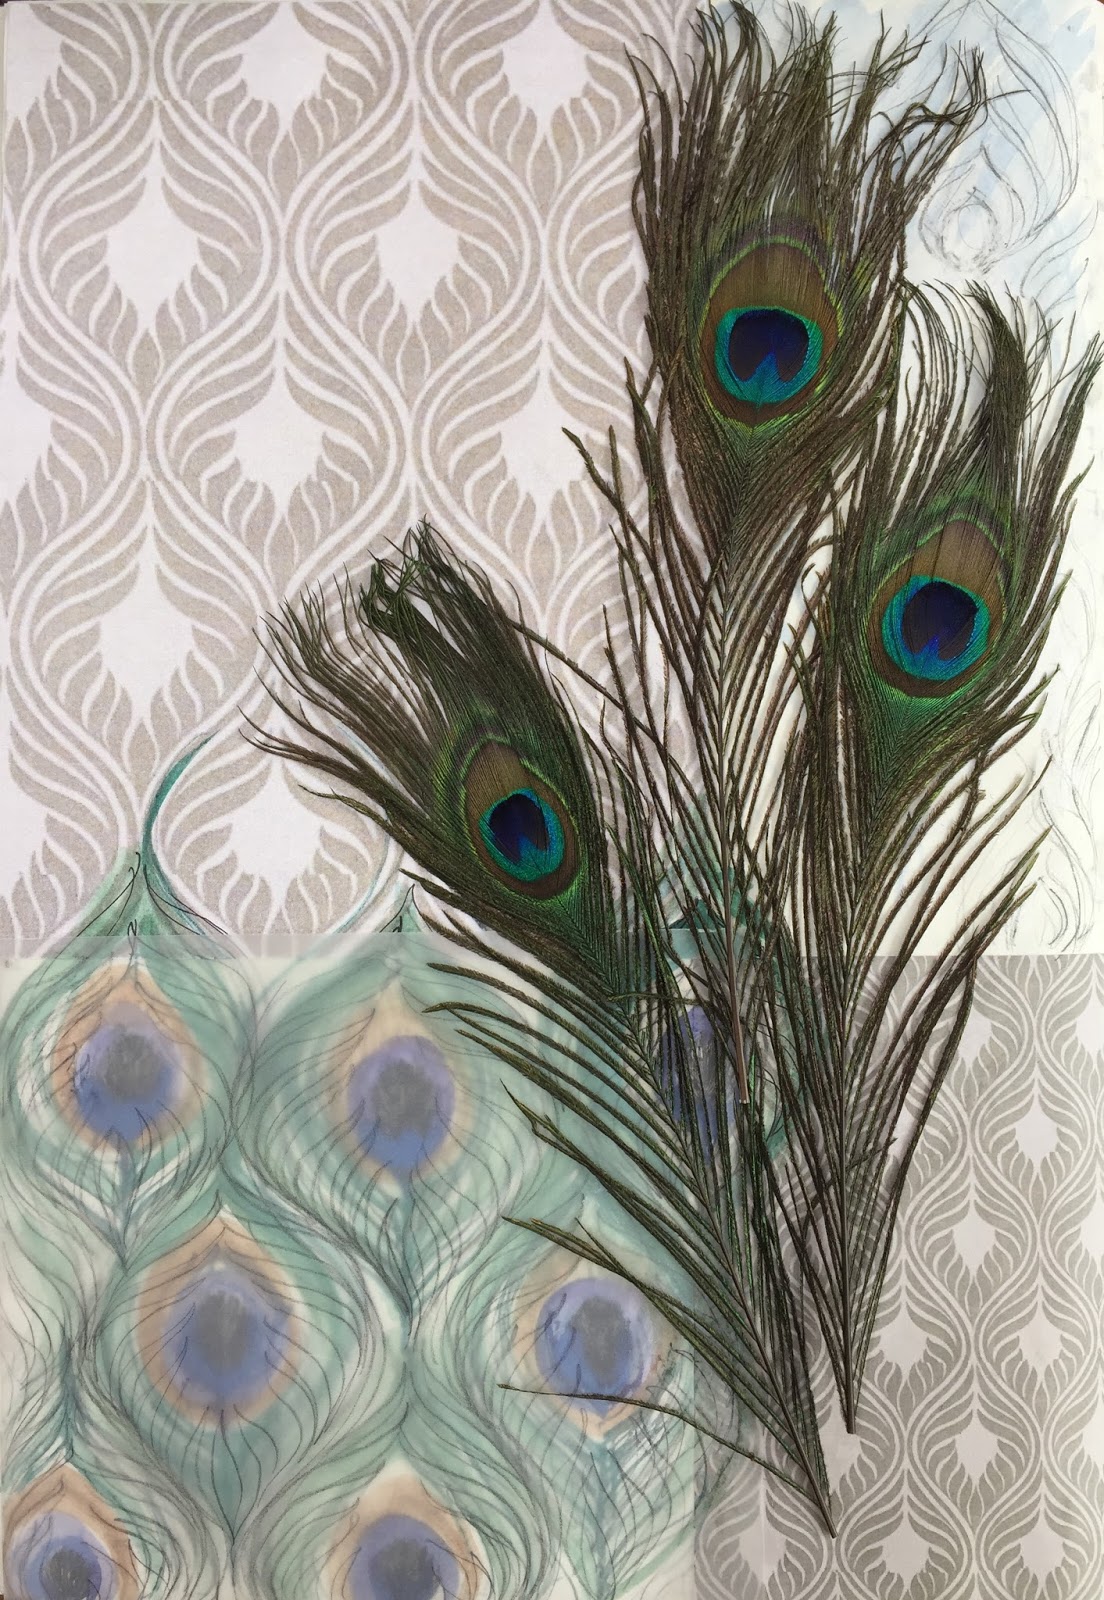 Sketchbook project - Part 3, Feathers section complete!